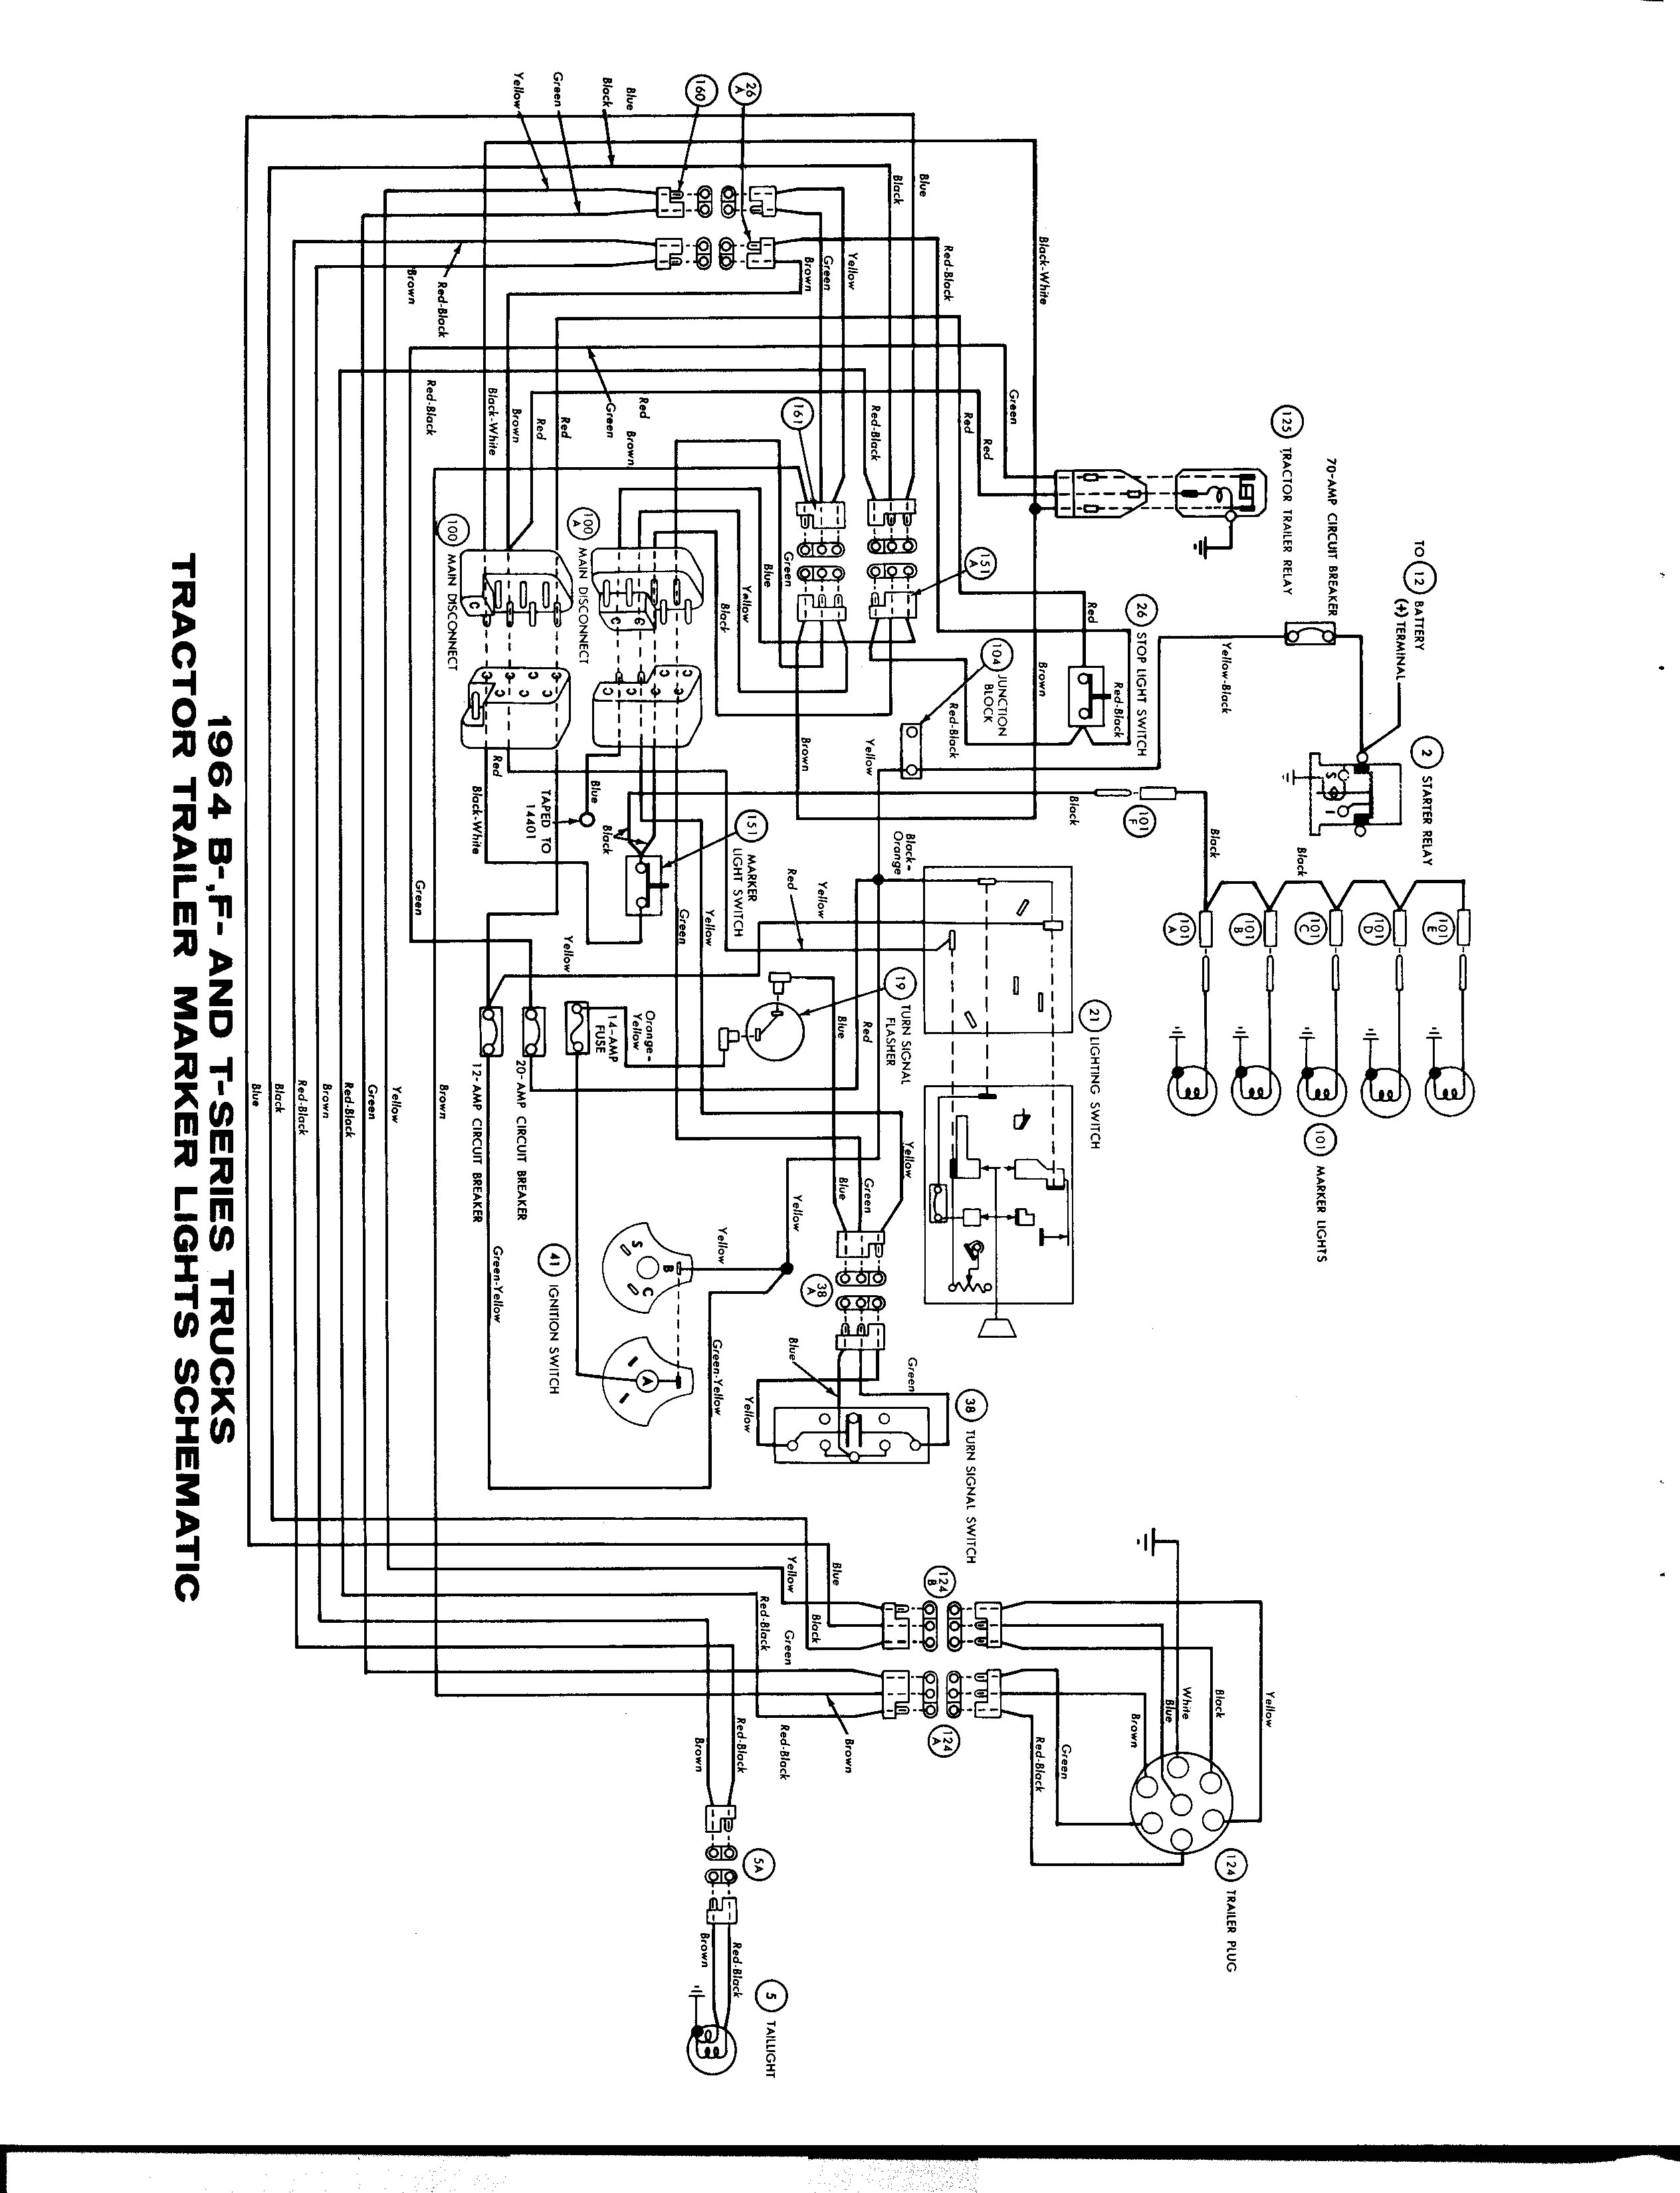 1964 Ford 2000 tractor wiring diagram #7